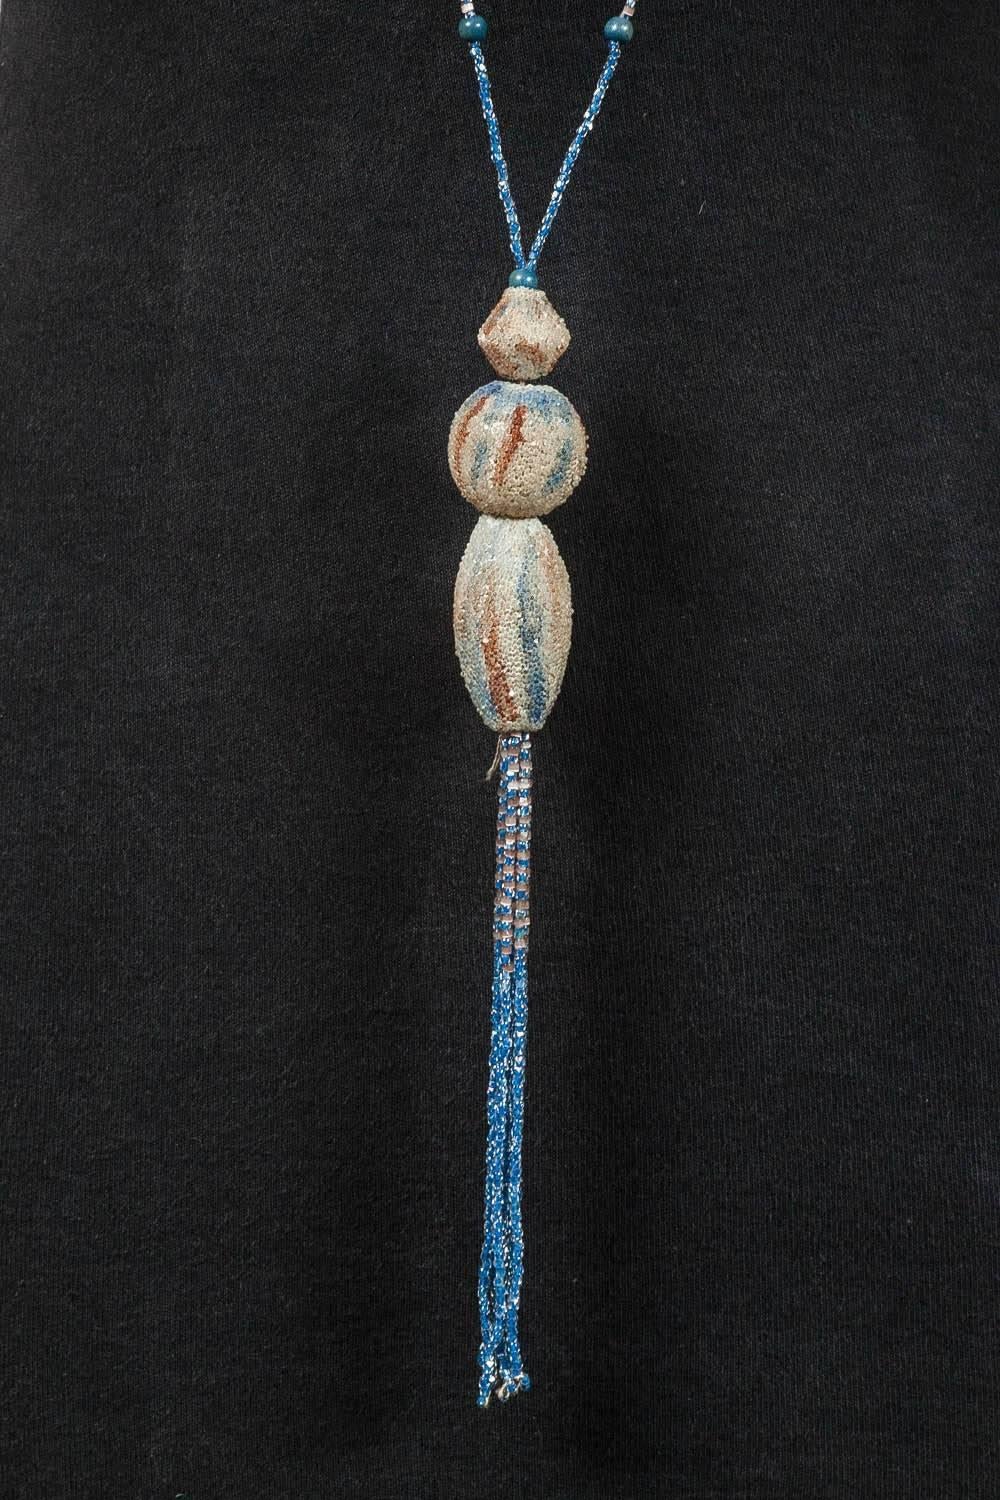 This is such an unusual flapper necklace. in classic 1920s colours of soft peach, sand and blue. The larger beads have tiny beads stuck on in wonderful wave like patterns. It is hard to imagine how this work was done, certainly by hand. This is a